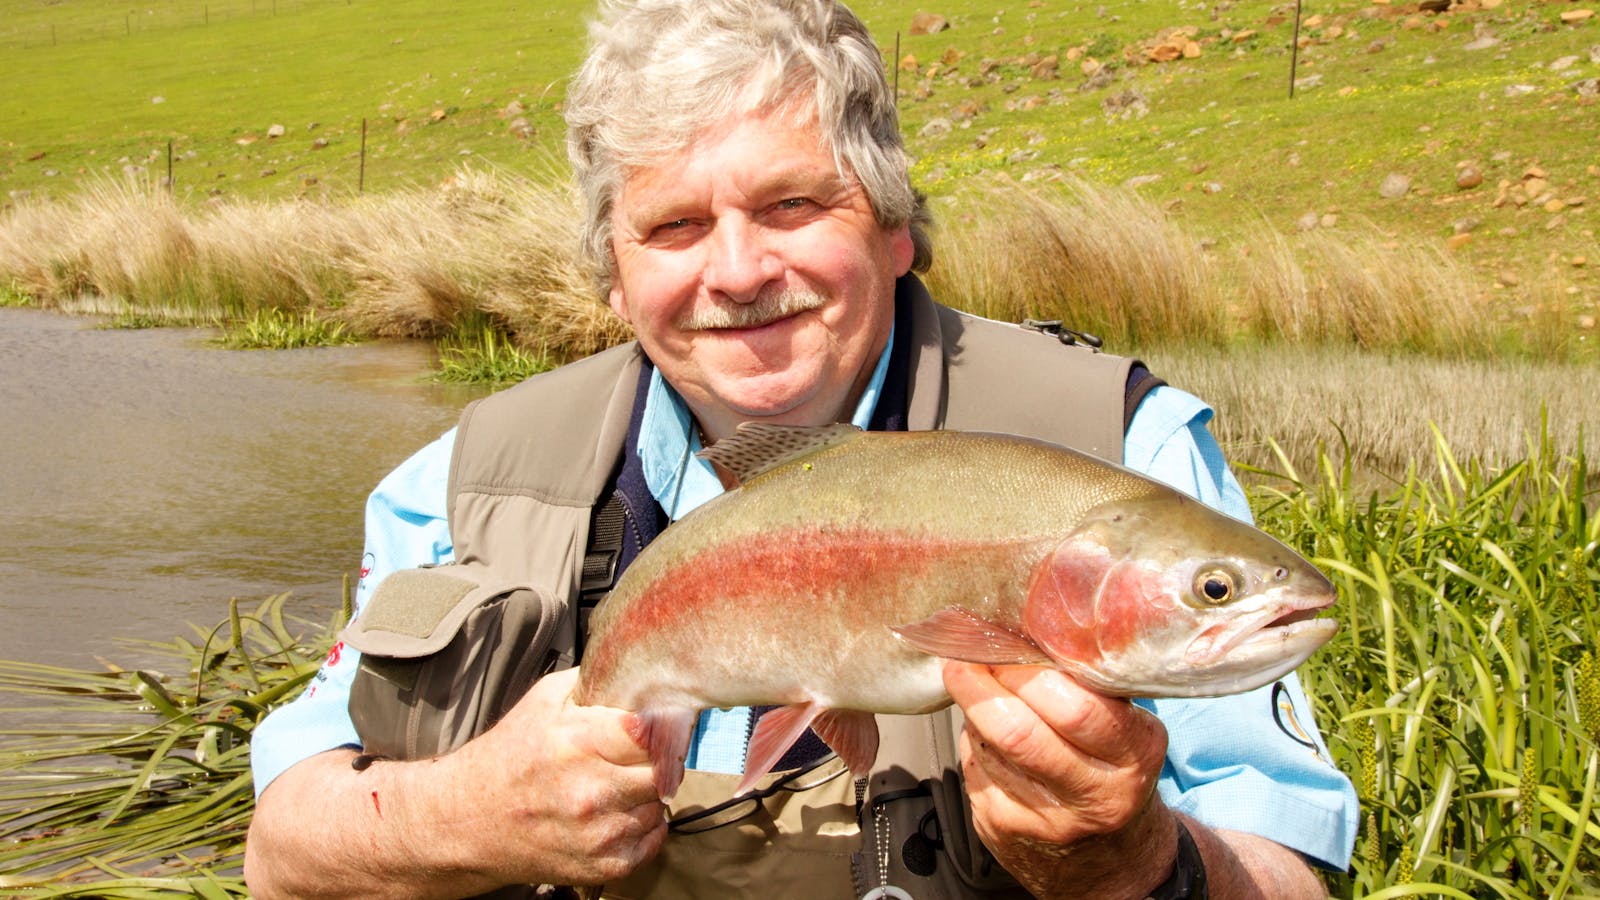 Our Fly Fishing guide, Ken Orr with a beautiful Rainbow Trout